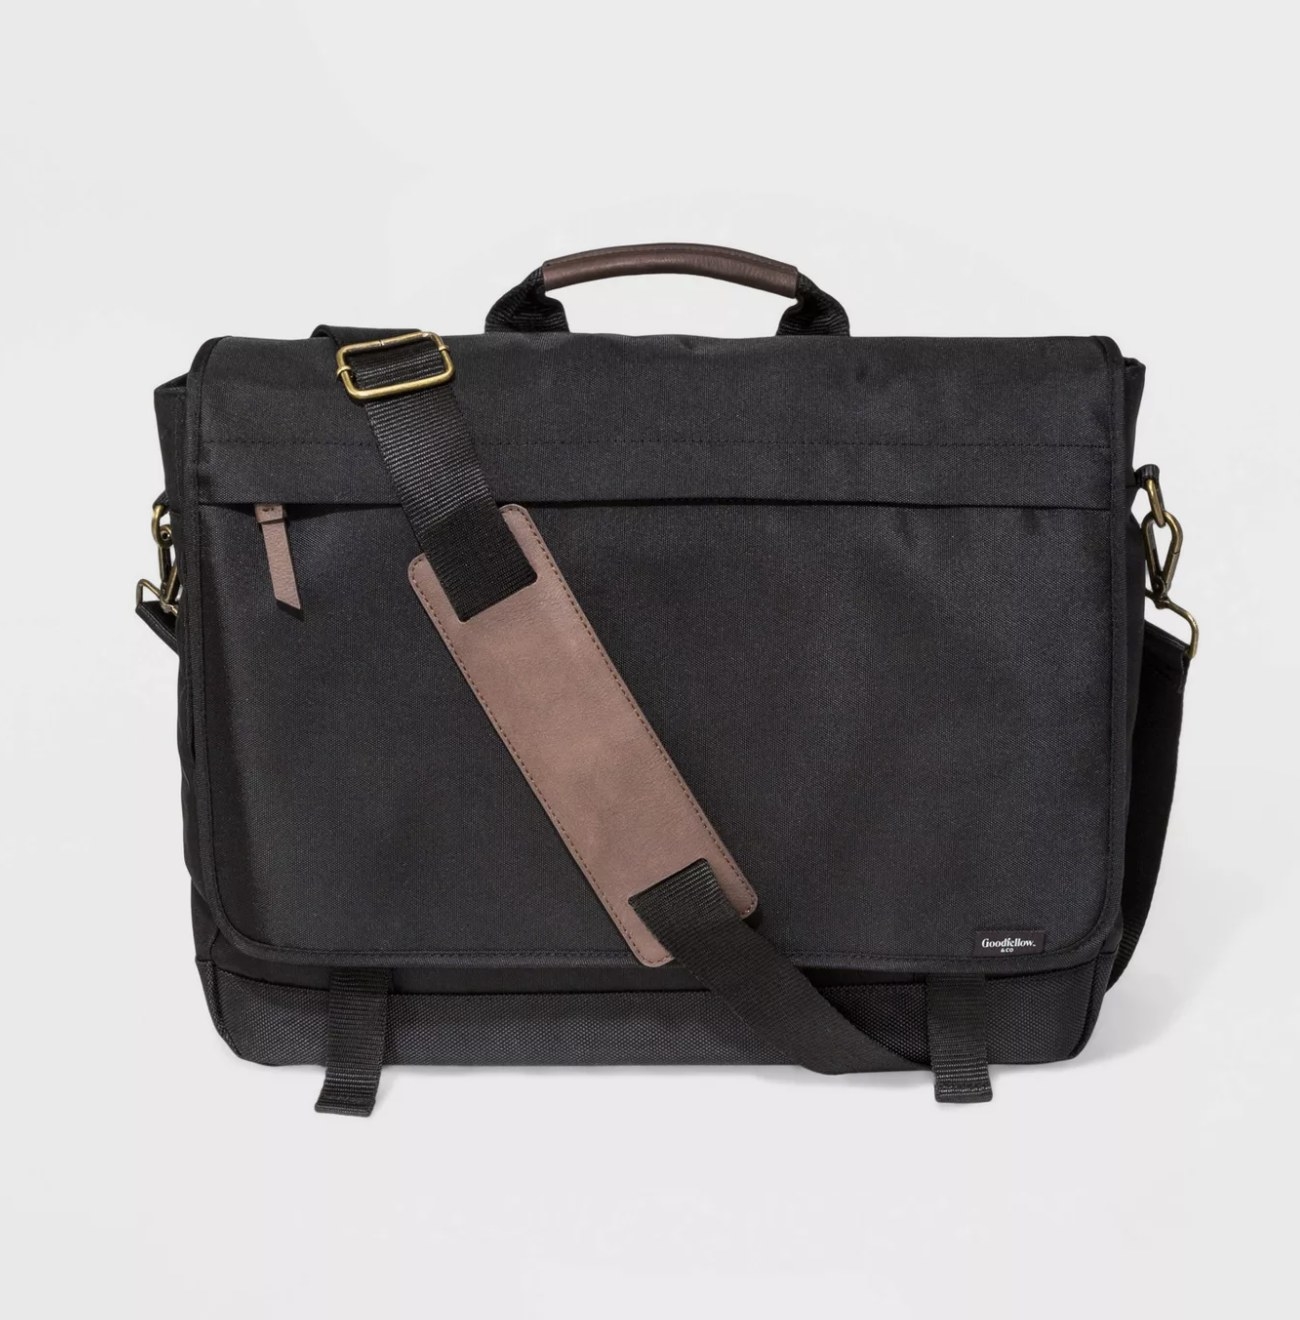 The black messenger bag has a light brown accent on the front zipper pocket, handle and strap